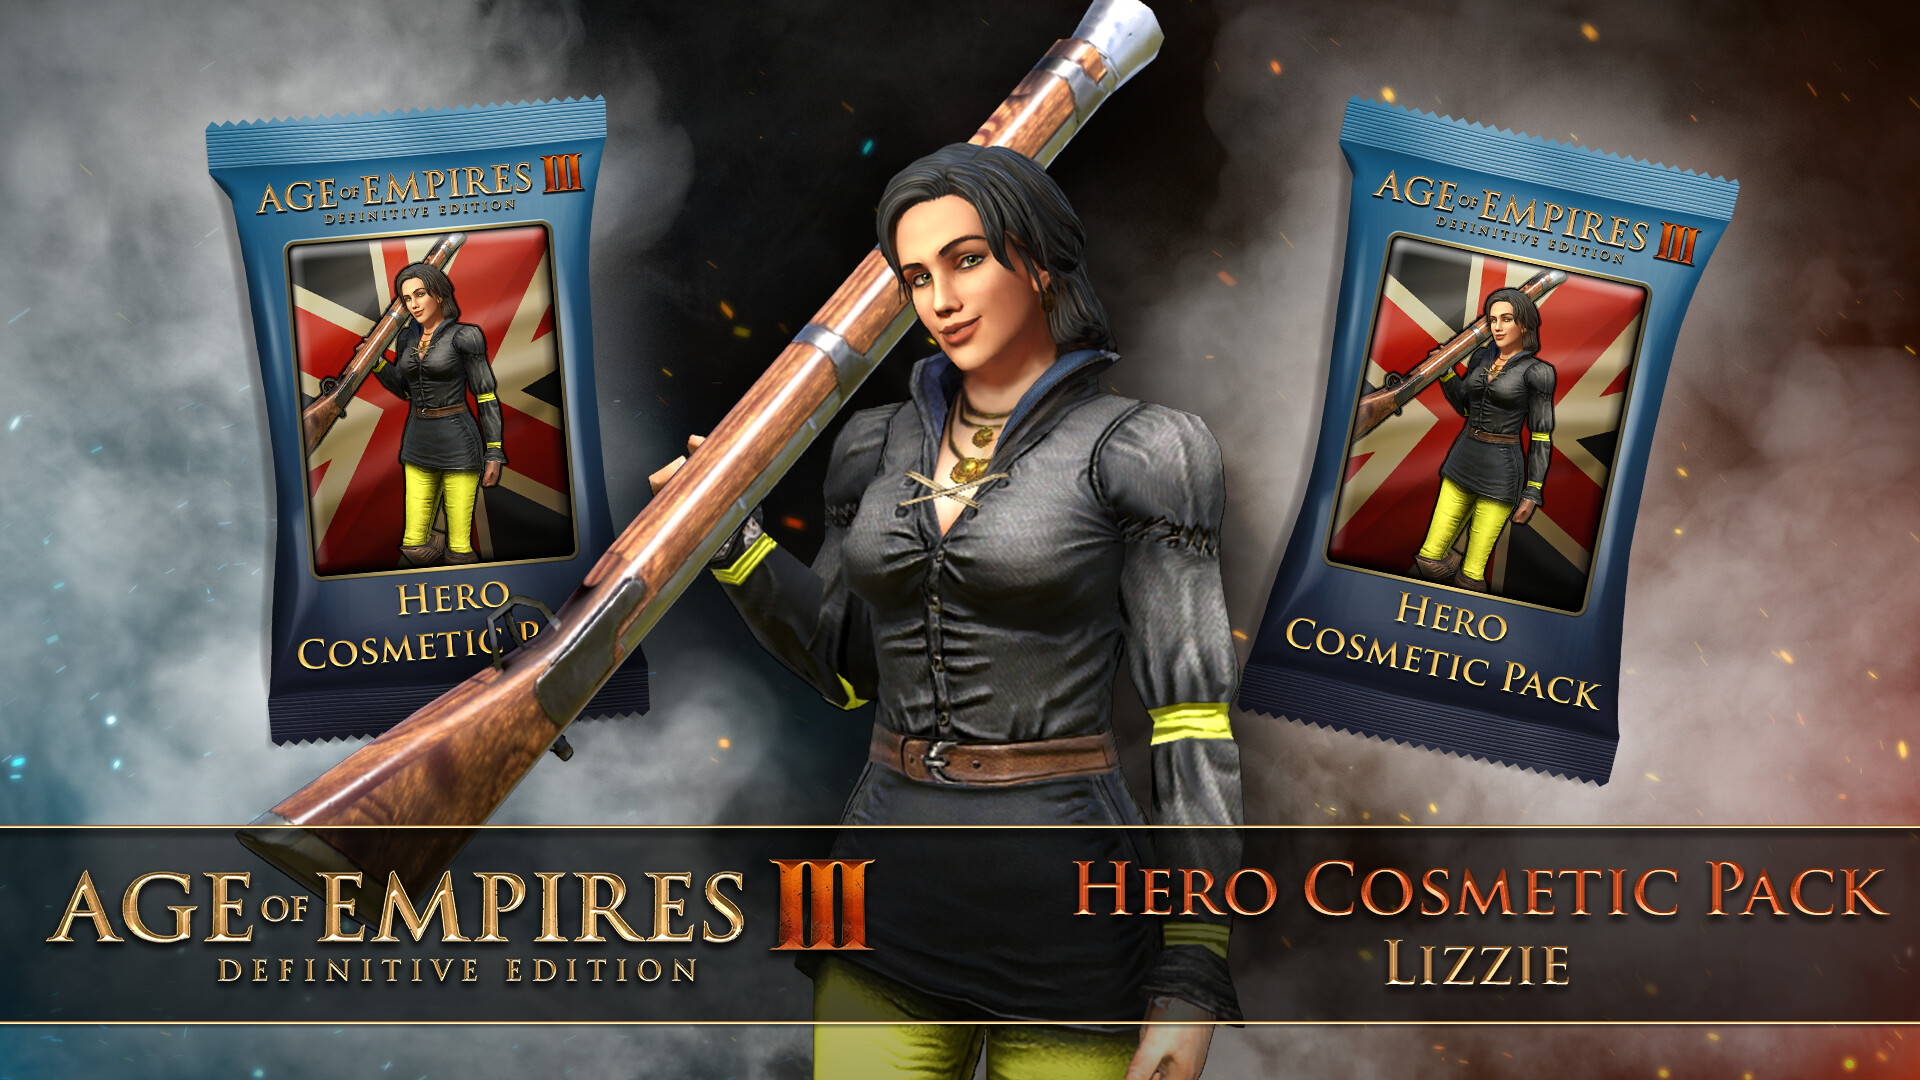 Age of Empires III: Definitive Edition – Hero Cosmetic Pack – Lizzie Featured Screenshot #1